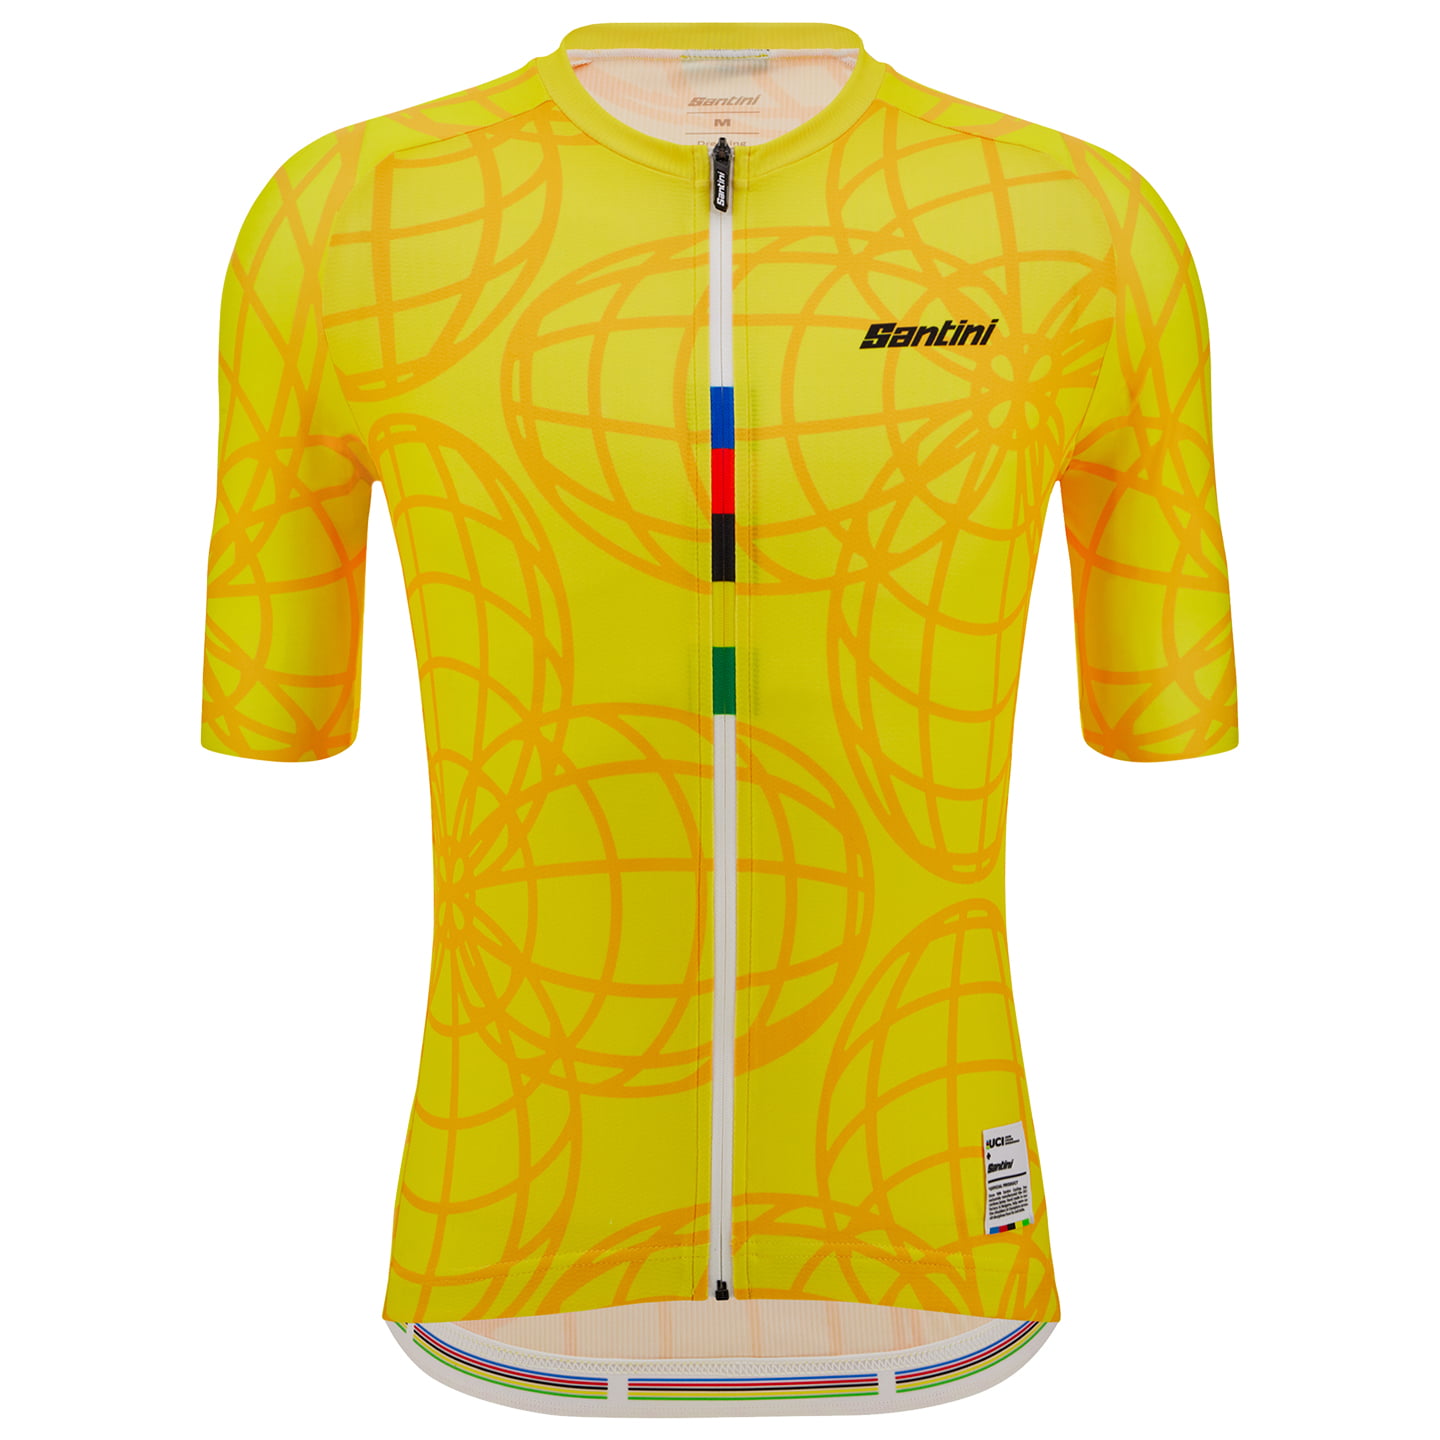 UCI GRANDI CAMPIONI Master 1982 Goodwood 2023 Short Sleeve Jersey, for men, size M, Cycle jersey, Cycling clothing